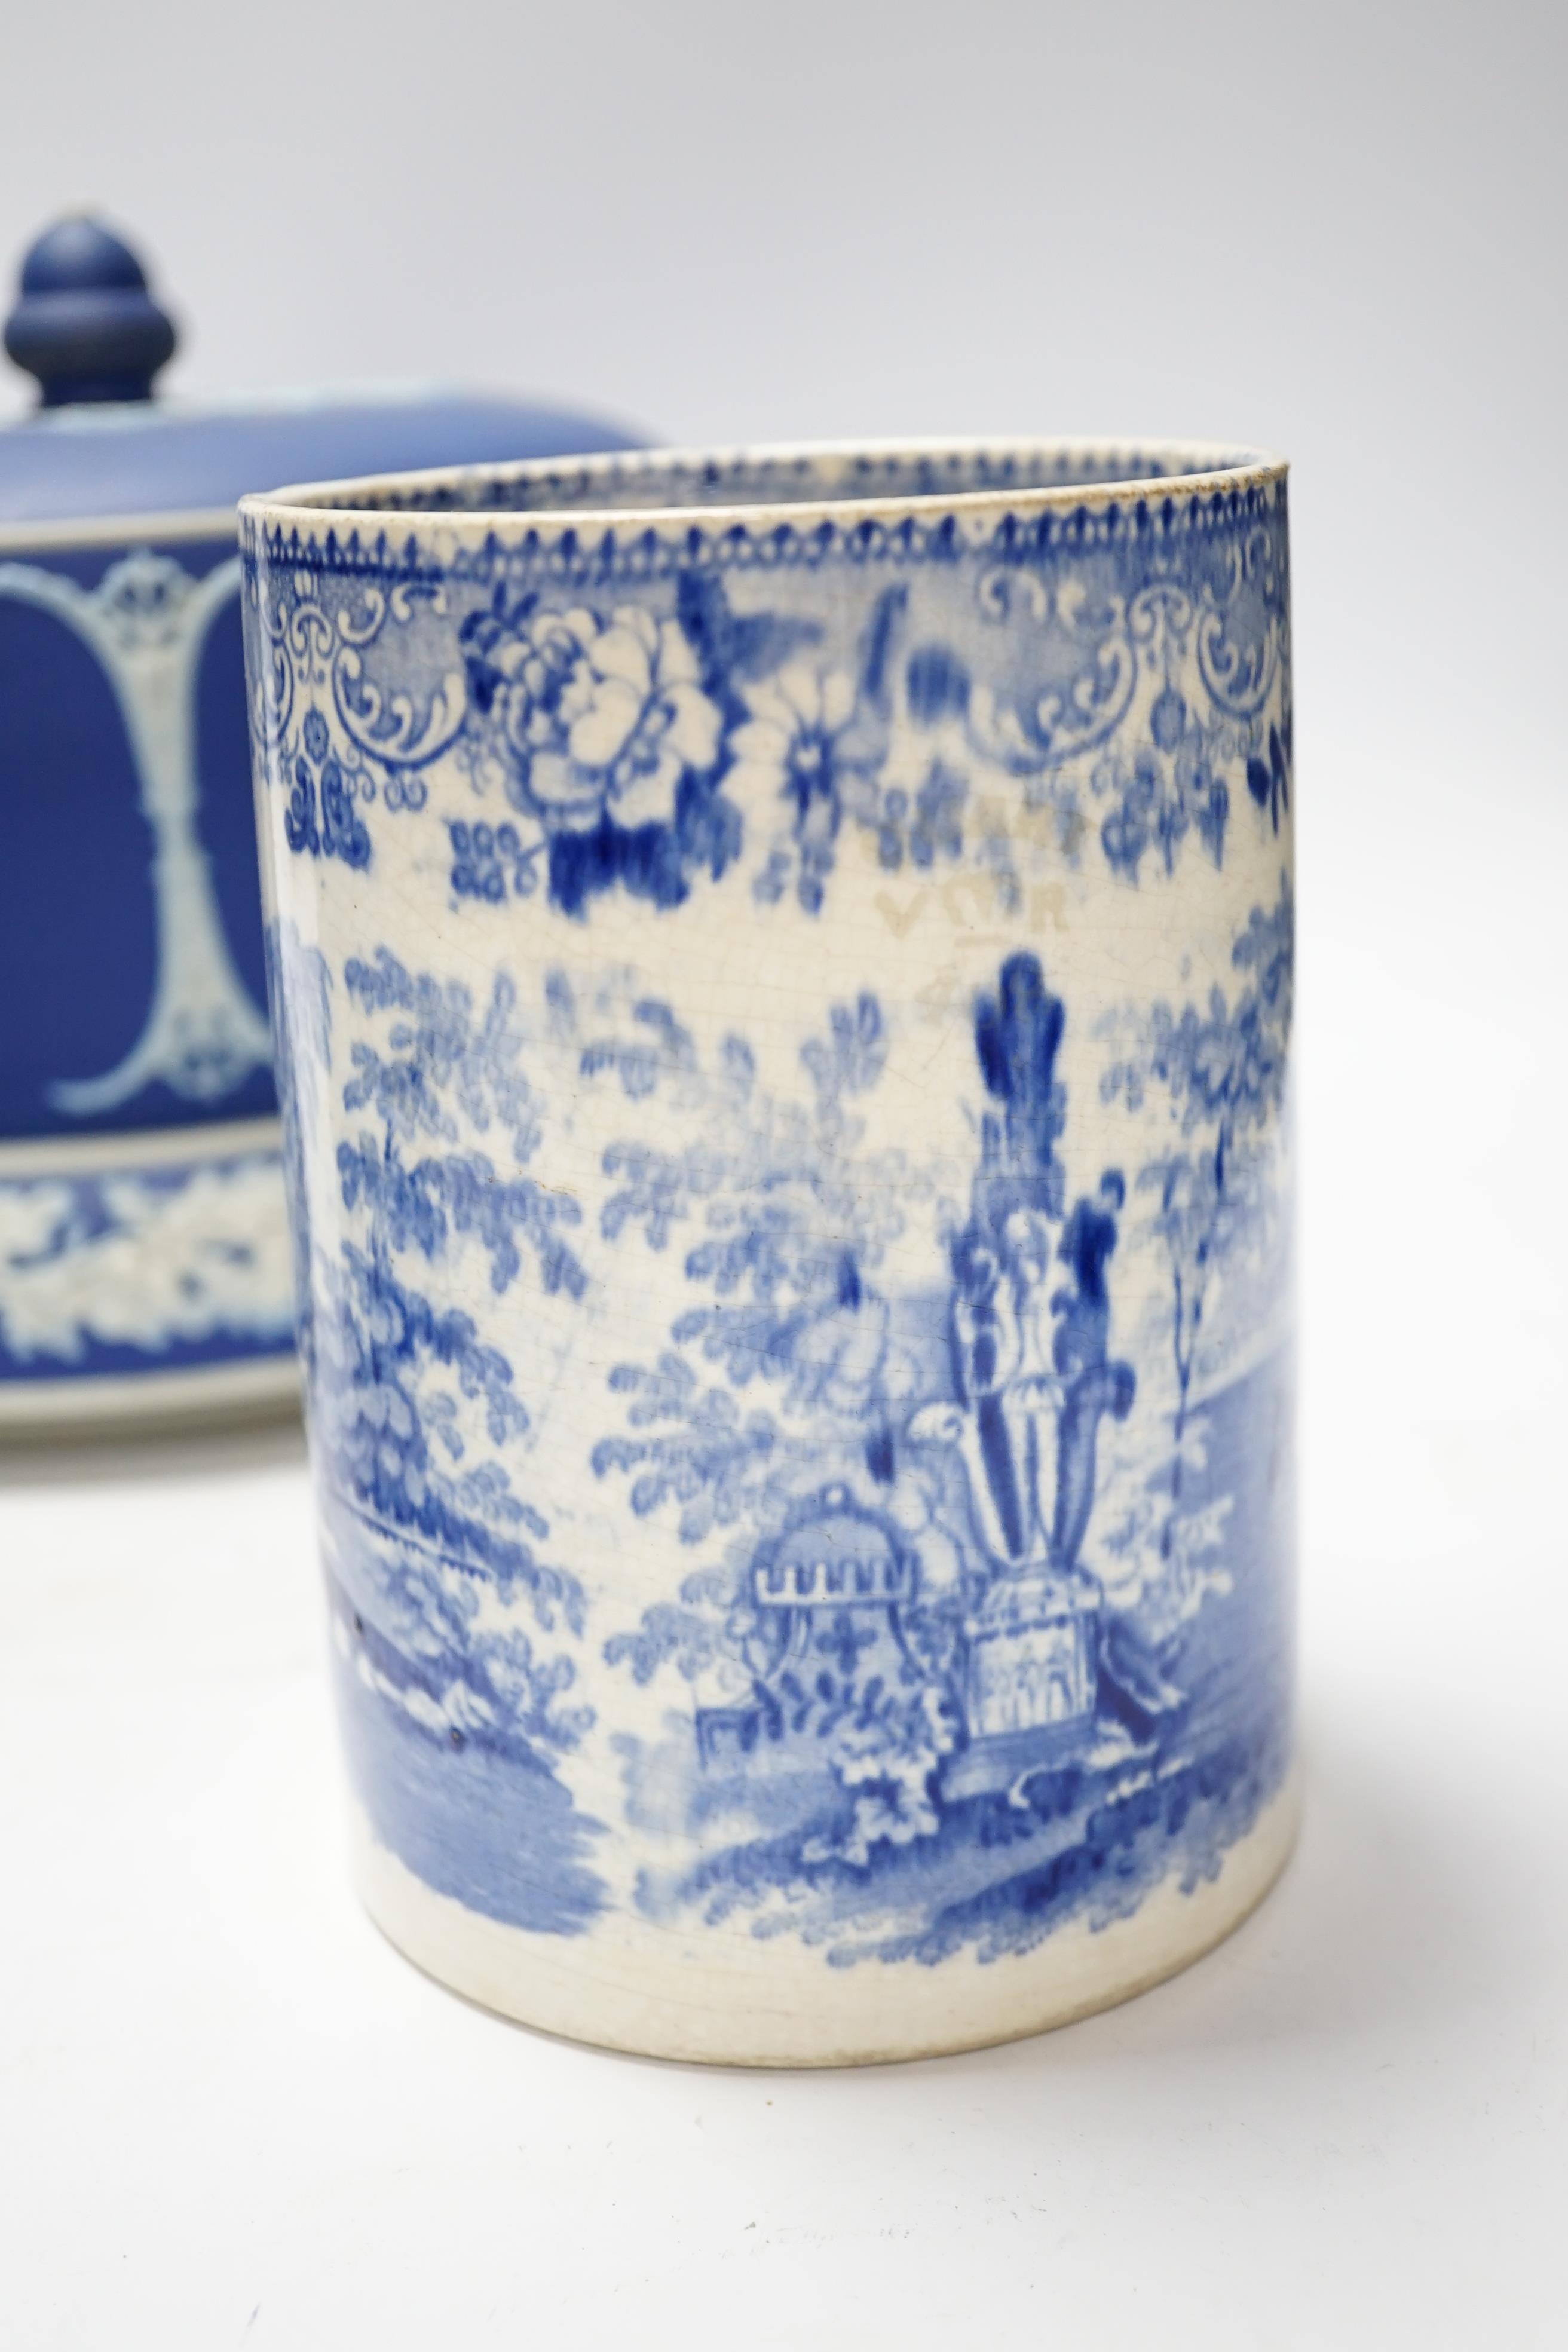 A Victorian Jasper ware cheese dome, a Wedgwood biscuit barrel and a transfer printed blue and white mug, largest 23cm in diameter